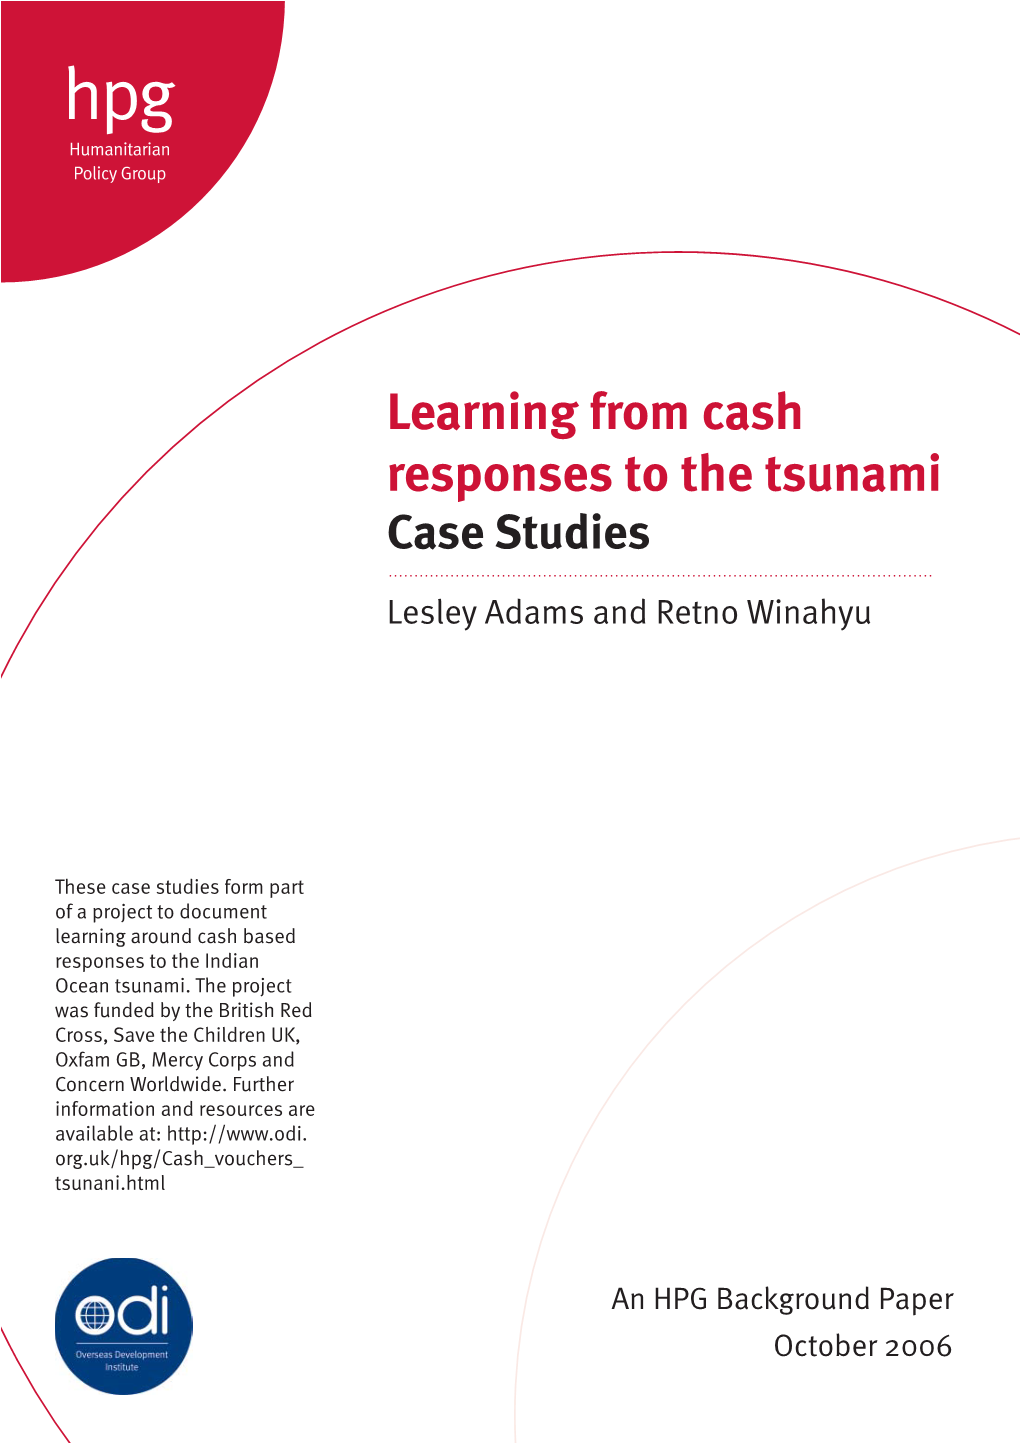 Learning from Cash Responses to the Tsunami Case Studies